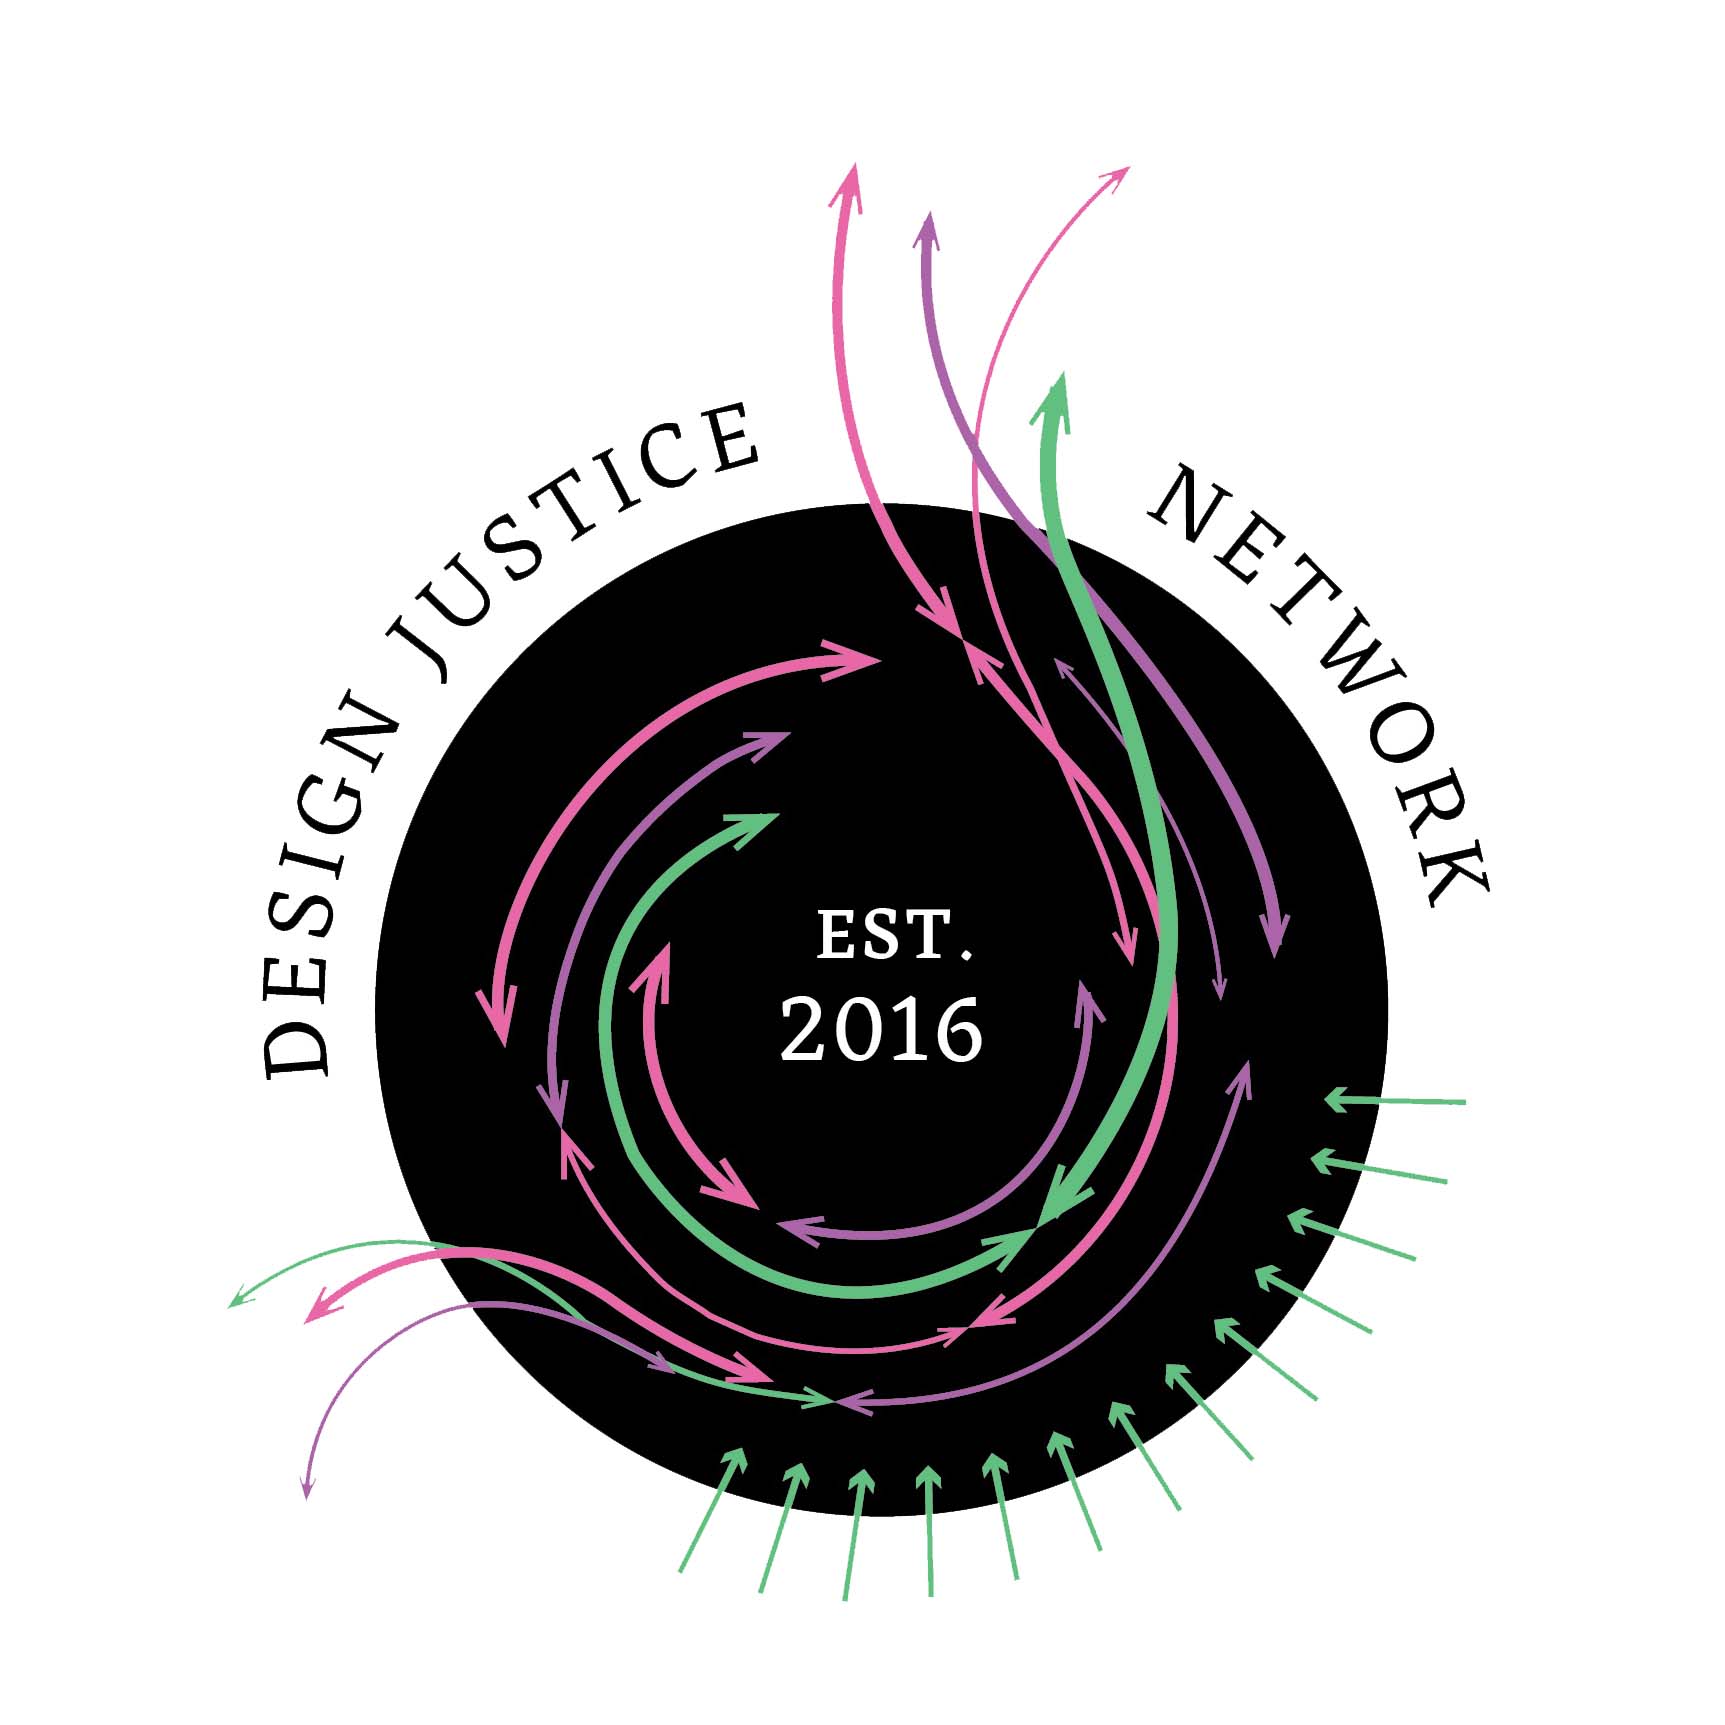 The Design Justice Network logo, which states it was first established in 2016